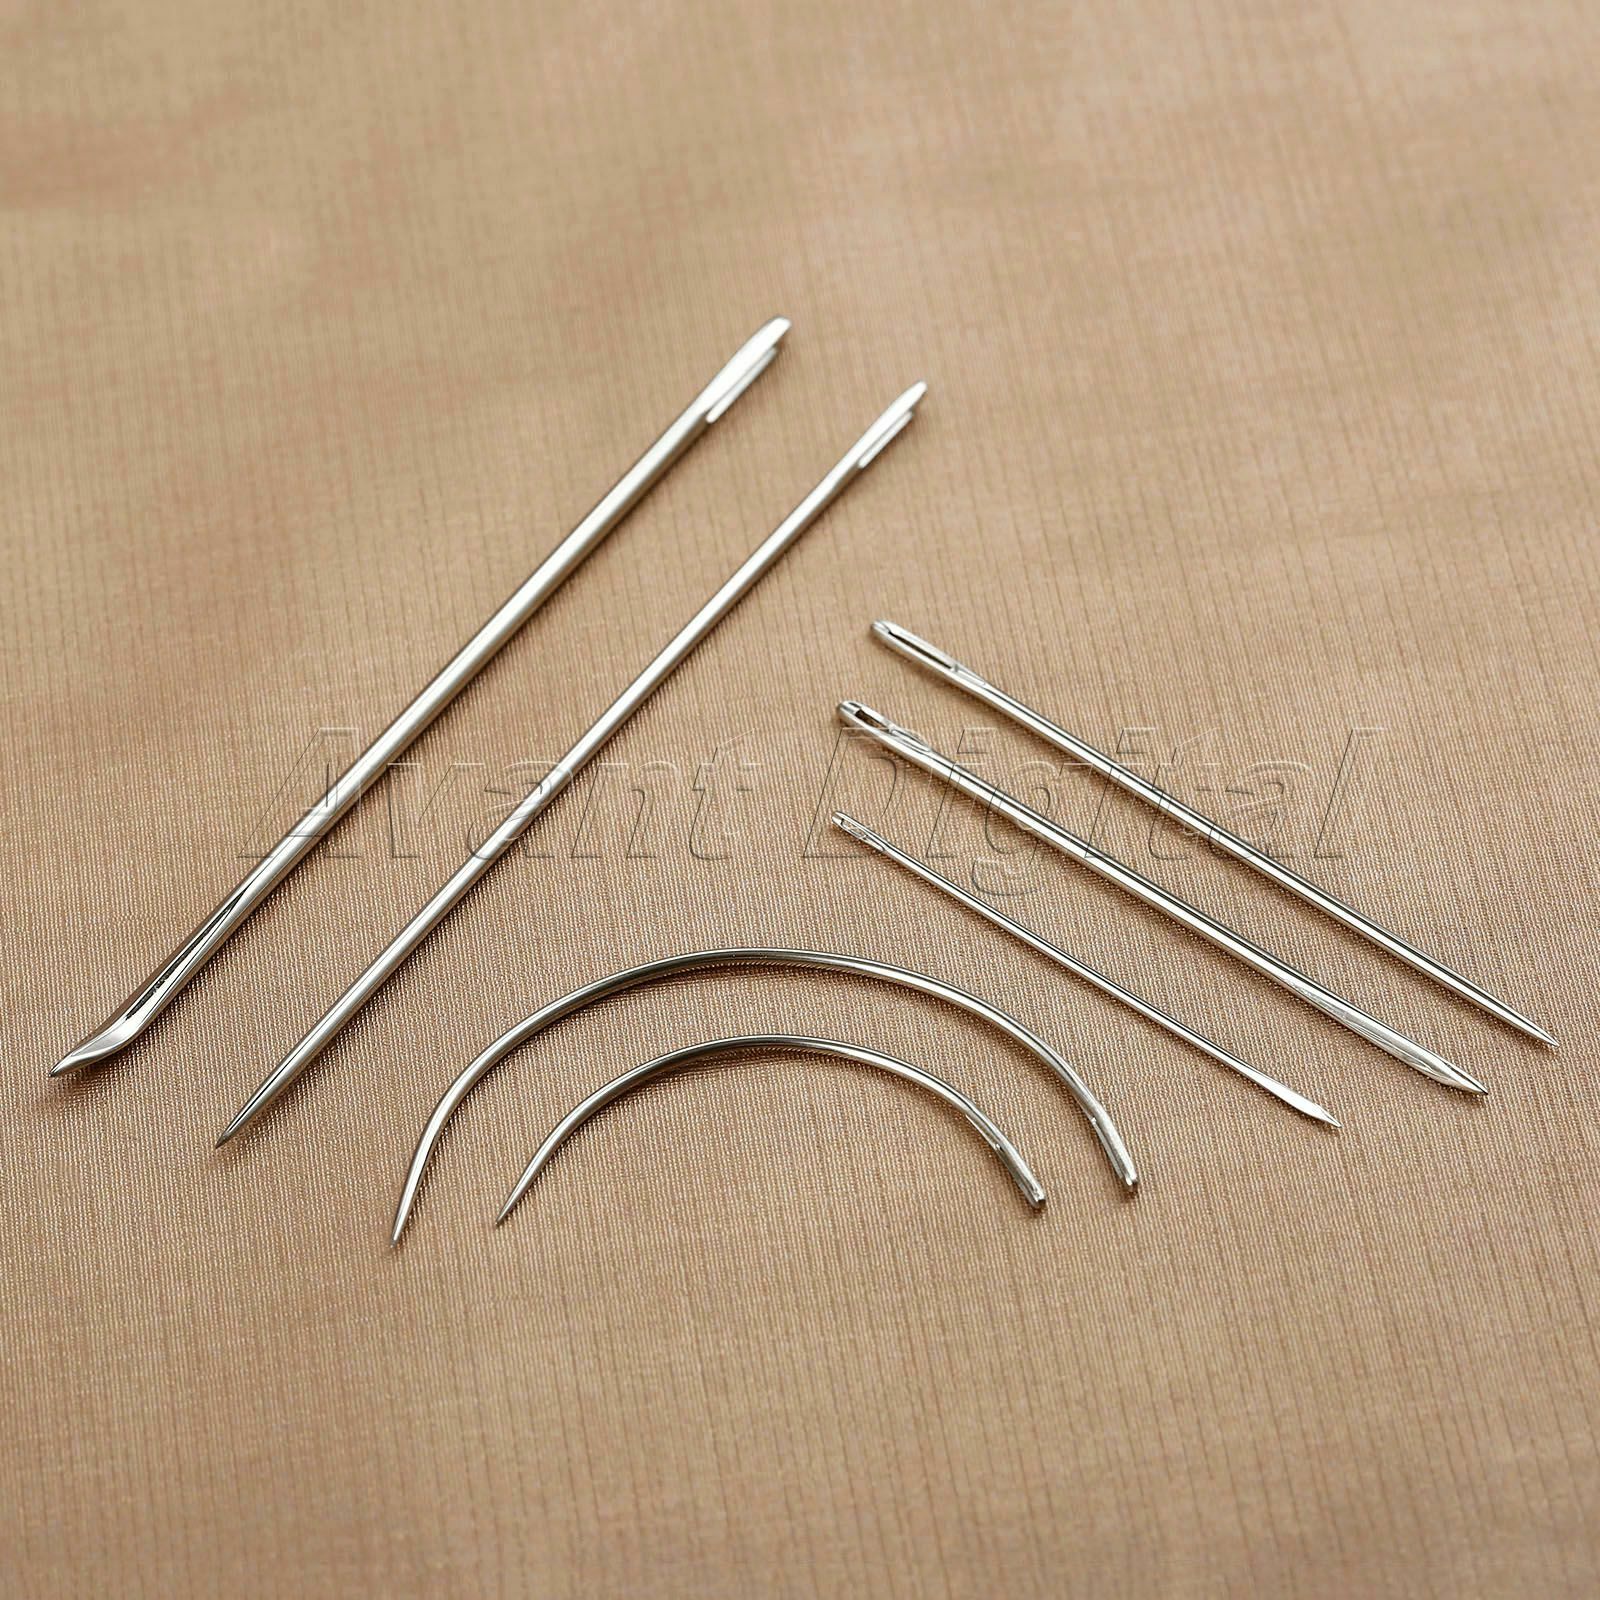 Set of 7 Hand Repair Upholstery Sewing & Curved Needles Carpet Leather Canvas